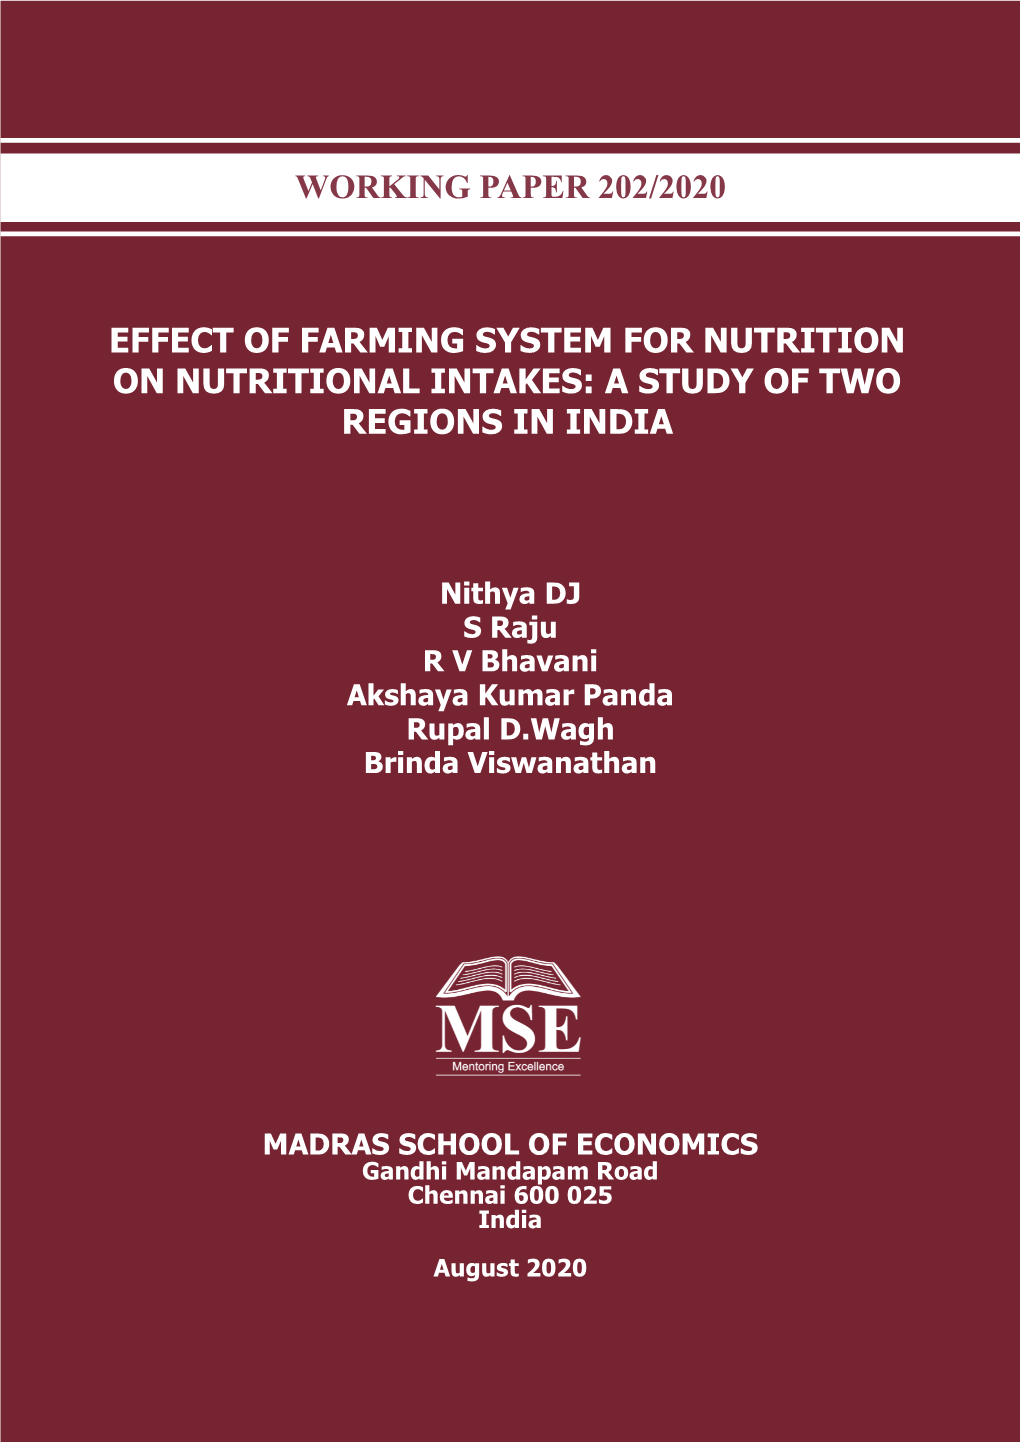 Working Paper 202/2020 Effect of Farming System for Nutrition on Nutritional Intakes: a Study of Two Regions in India